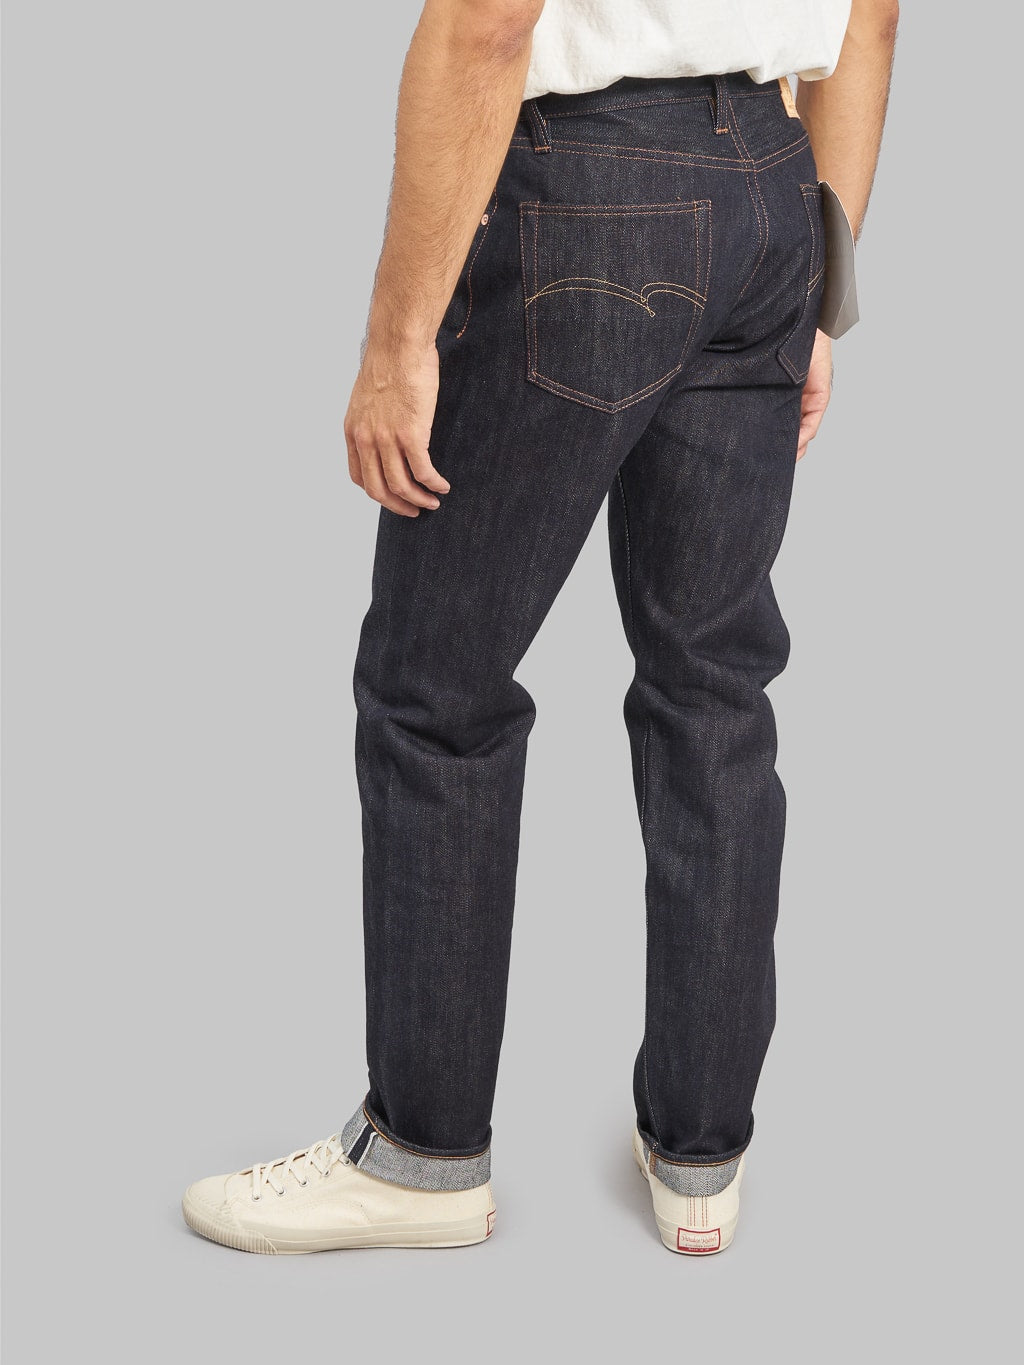 Studio D'Artisan Suvin Gold D1837 Relaxed Tapered Jeans